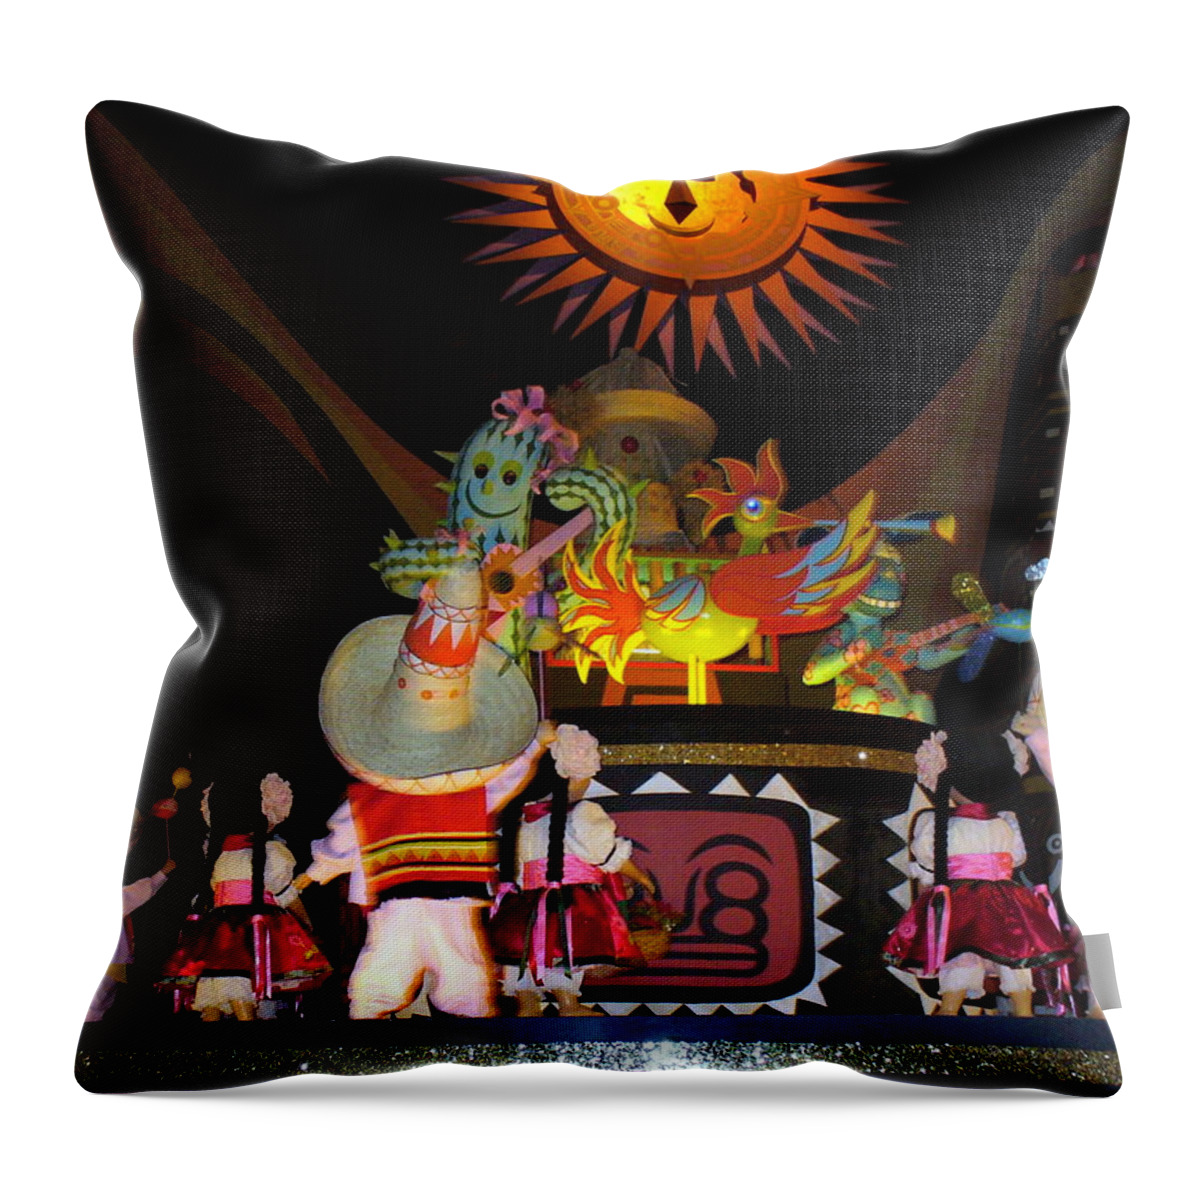 It's A Small World Ride Throw Pillow featuring the photograph It's A Small World with dancing Mexican character by Lingfai Leung